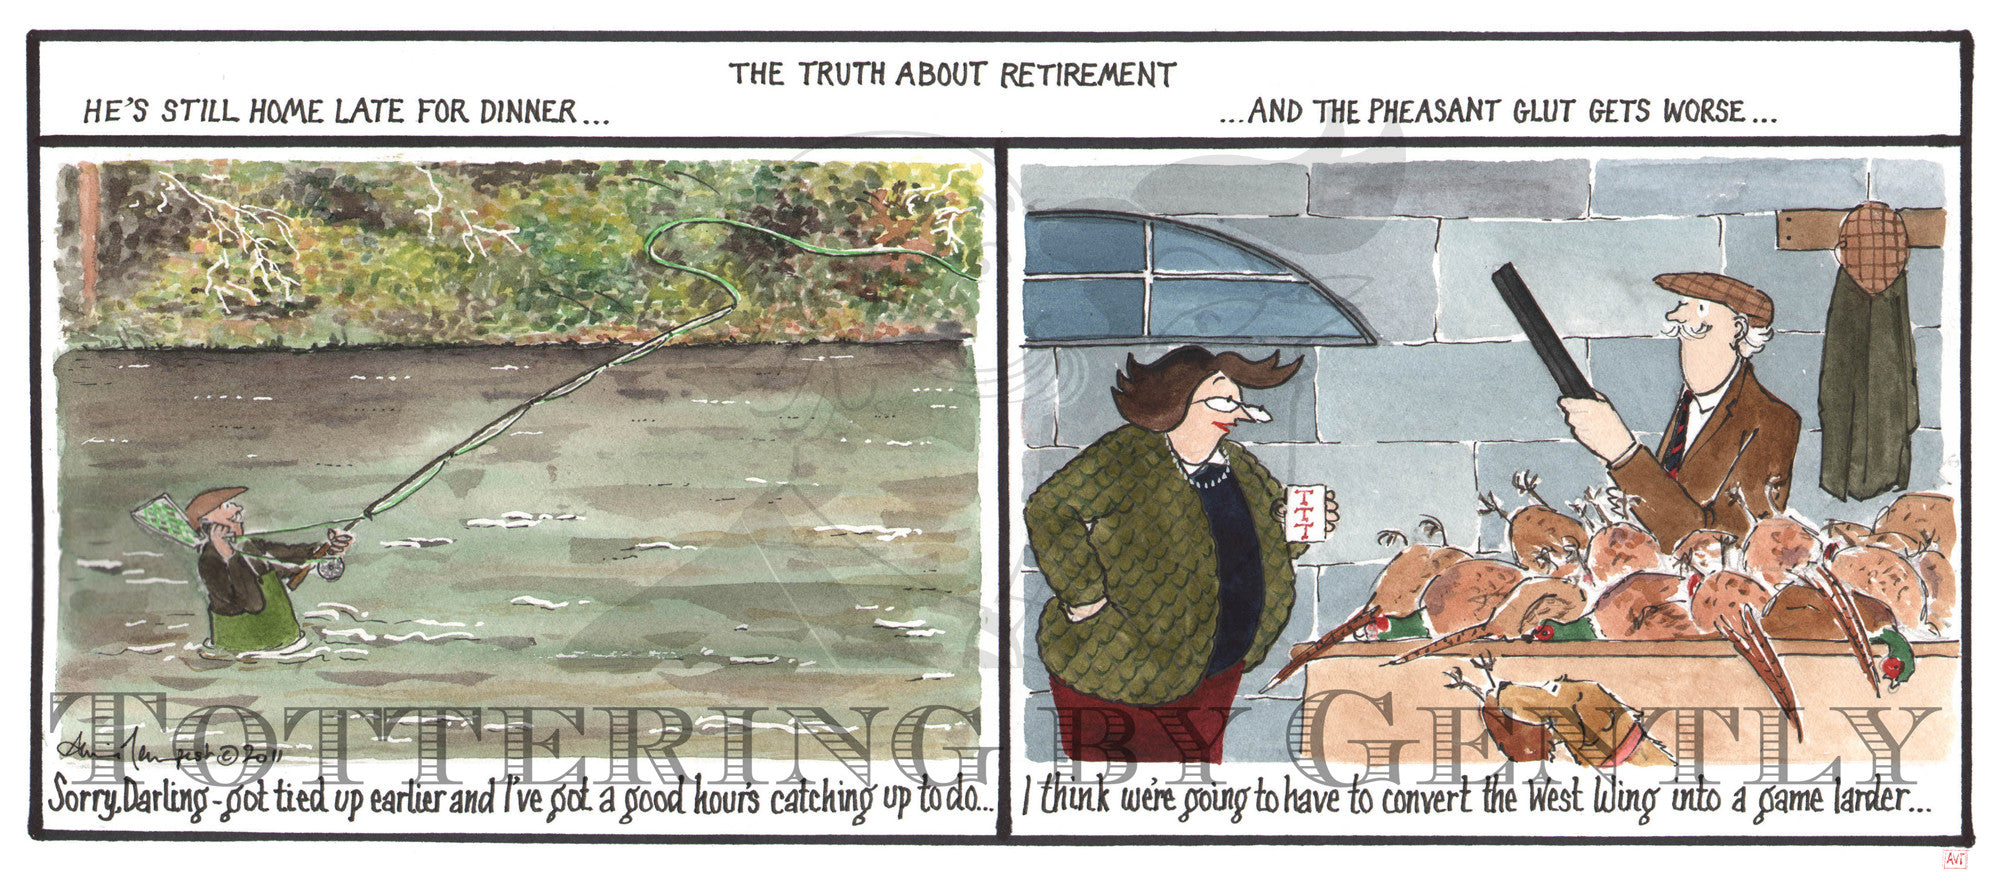 The Truth about retirement ...  (CL0912)